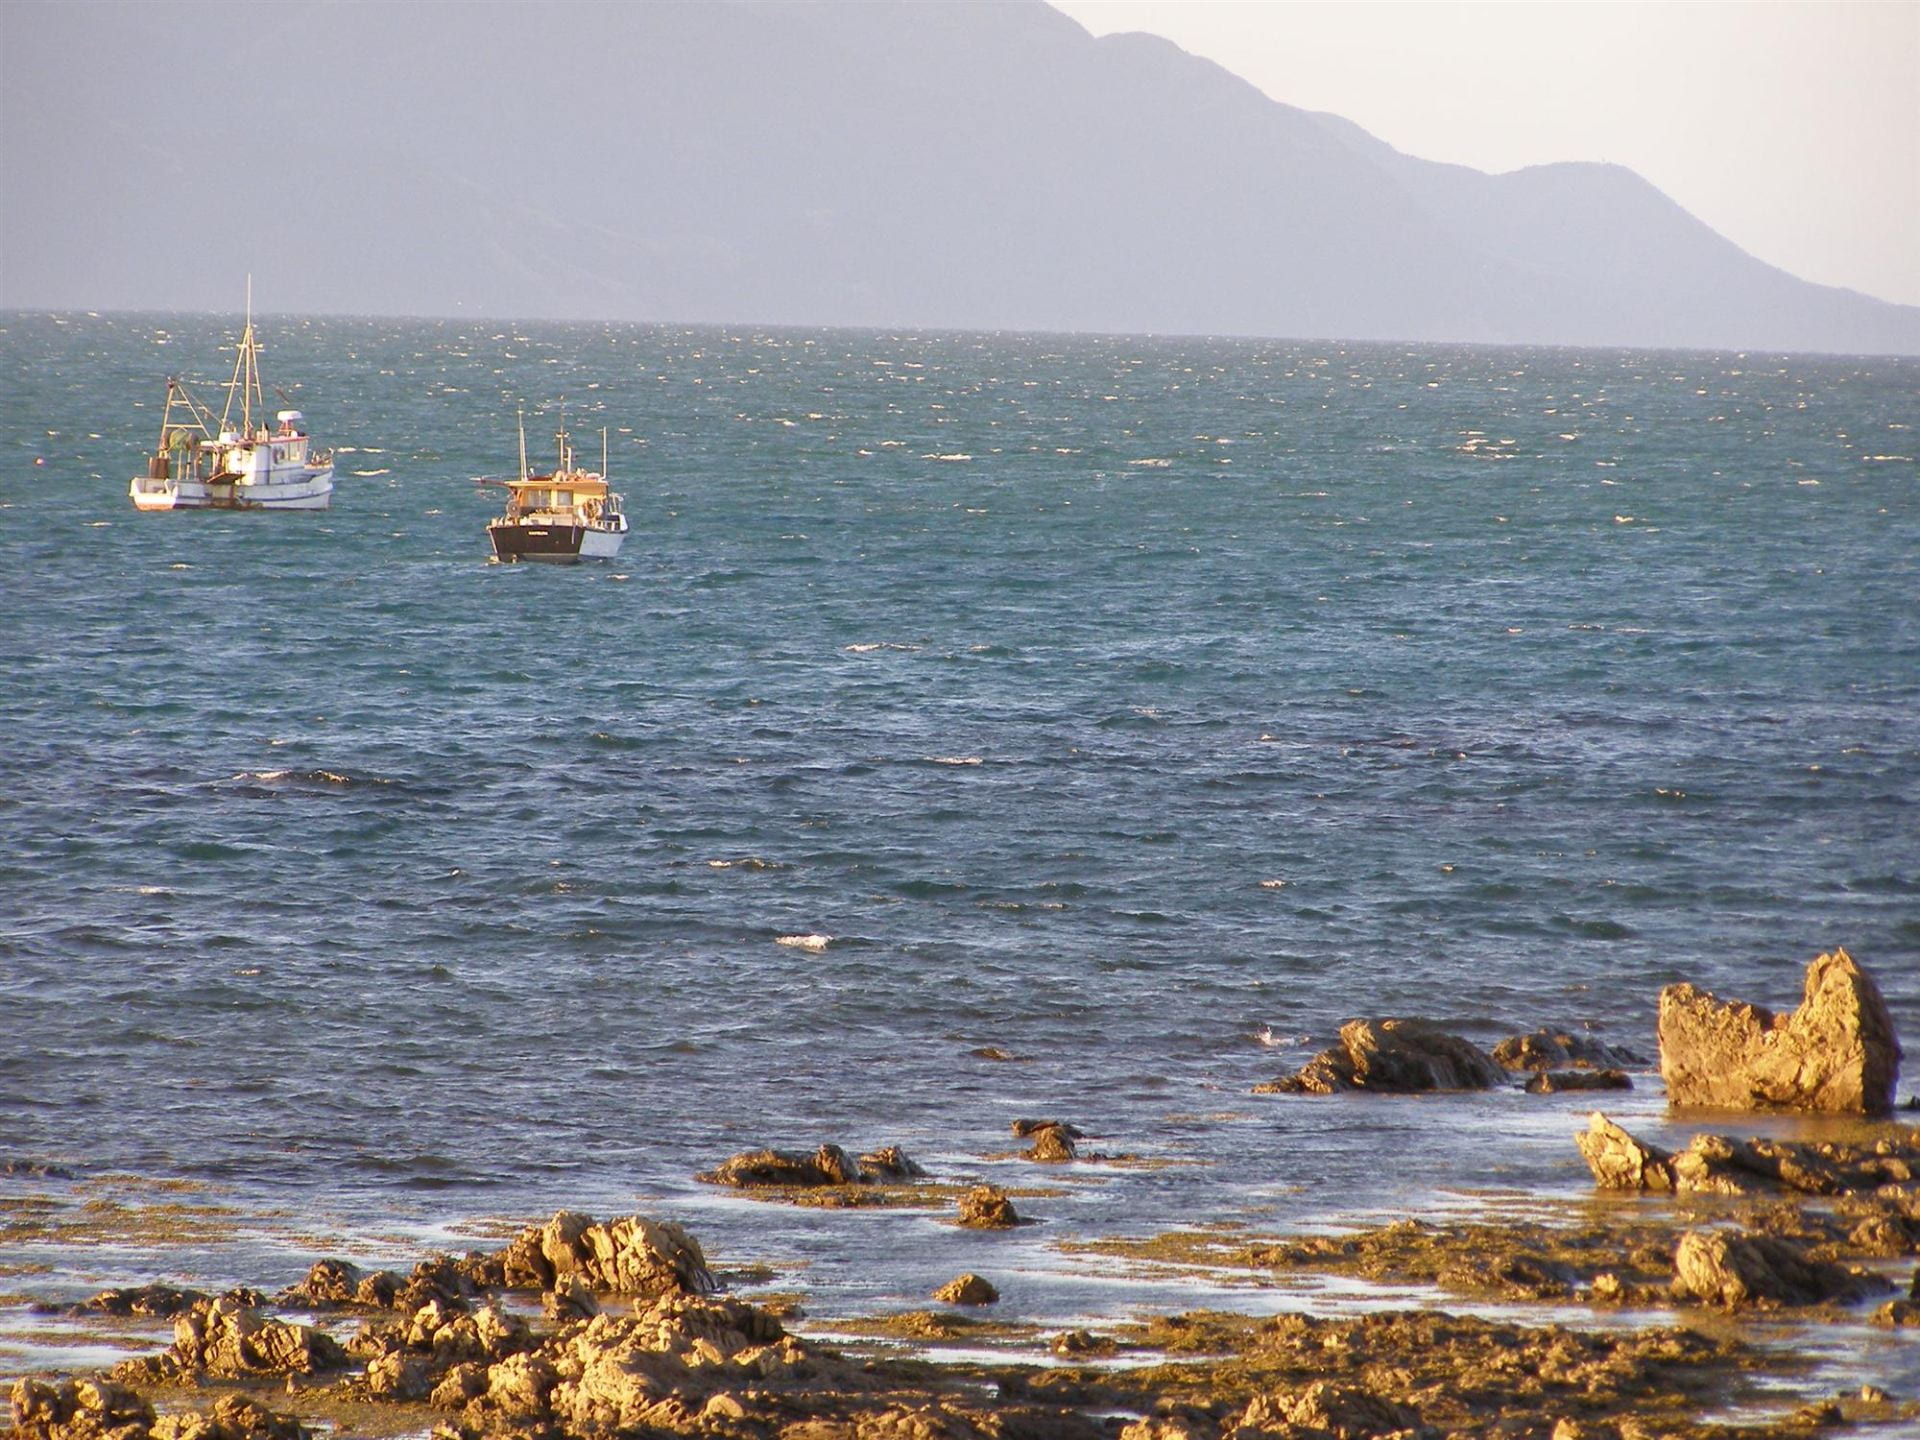 Two fishing vessels near the coast with the Kaikōura mountain in the background, and a rocky shore in the foreground